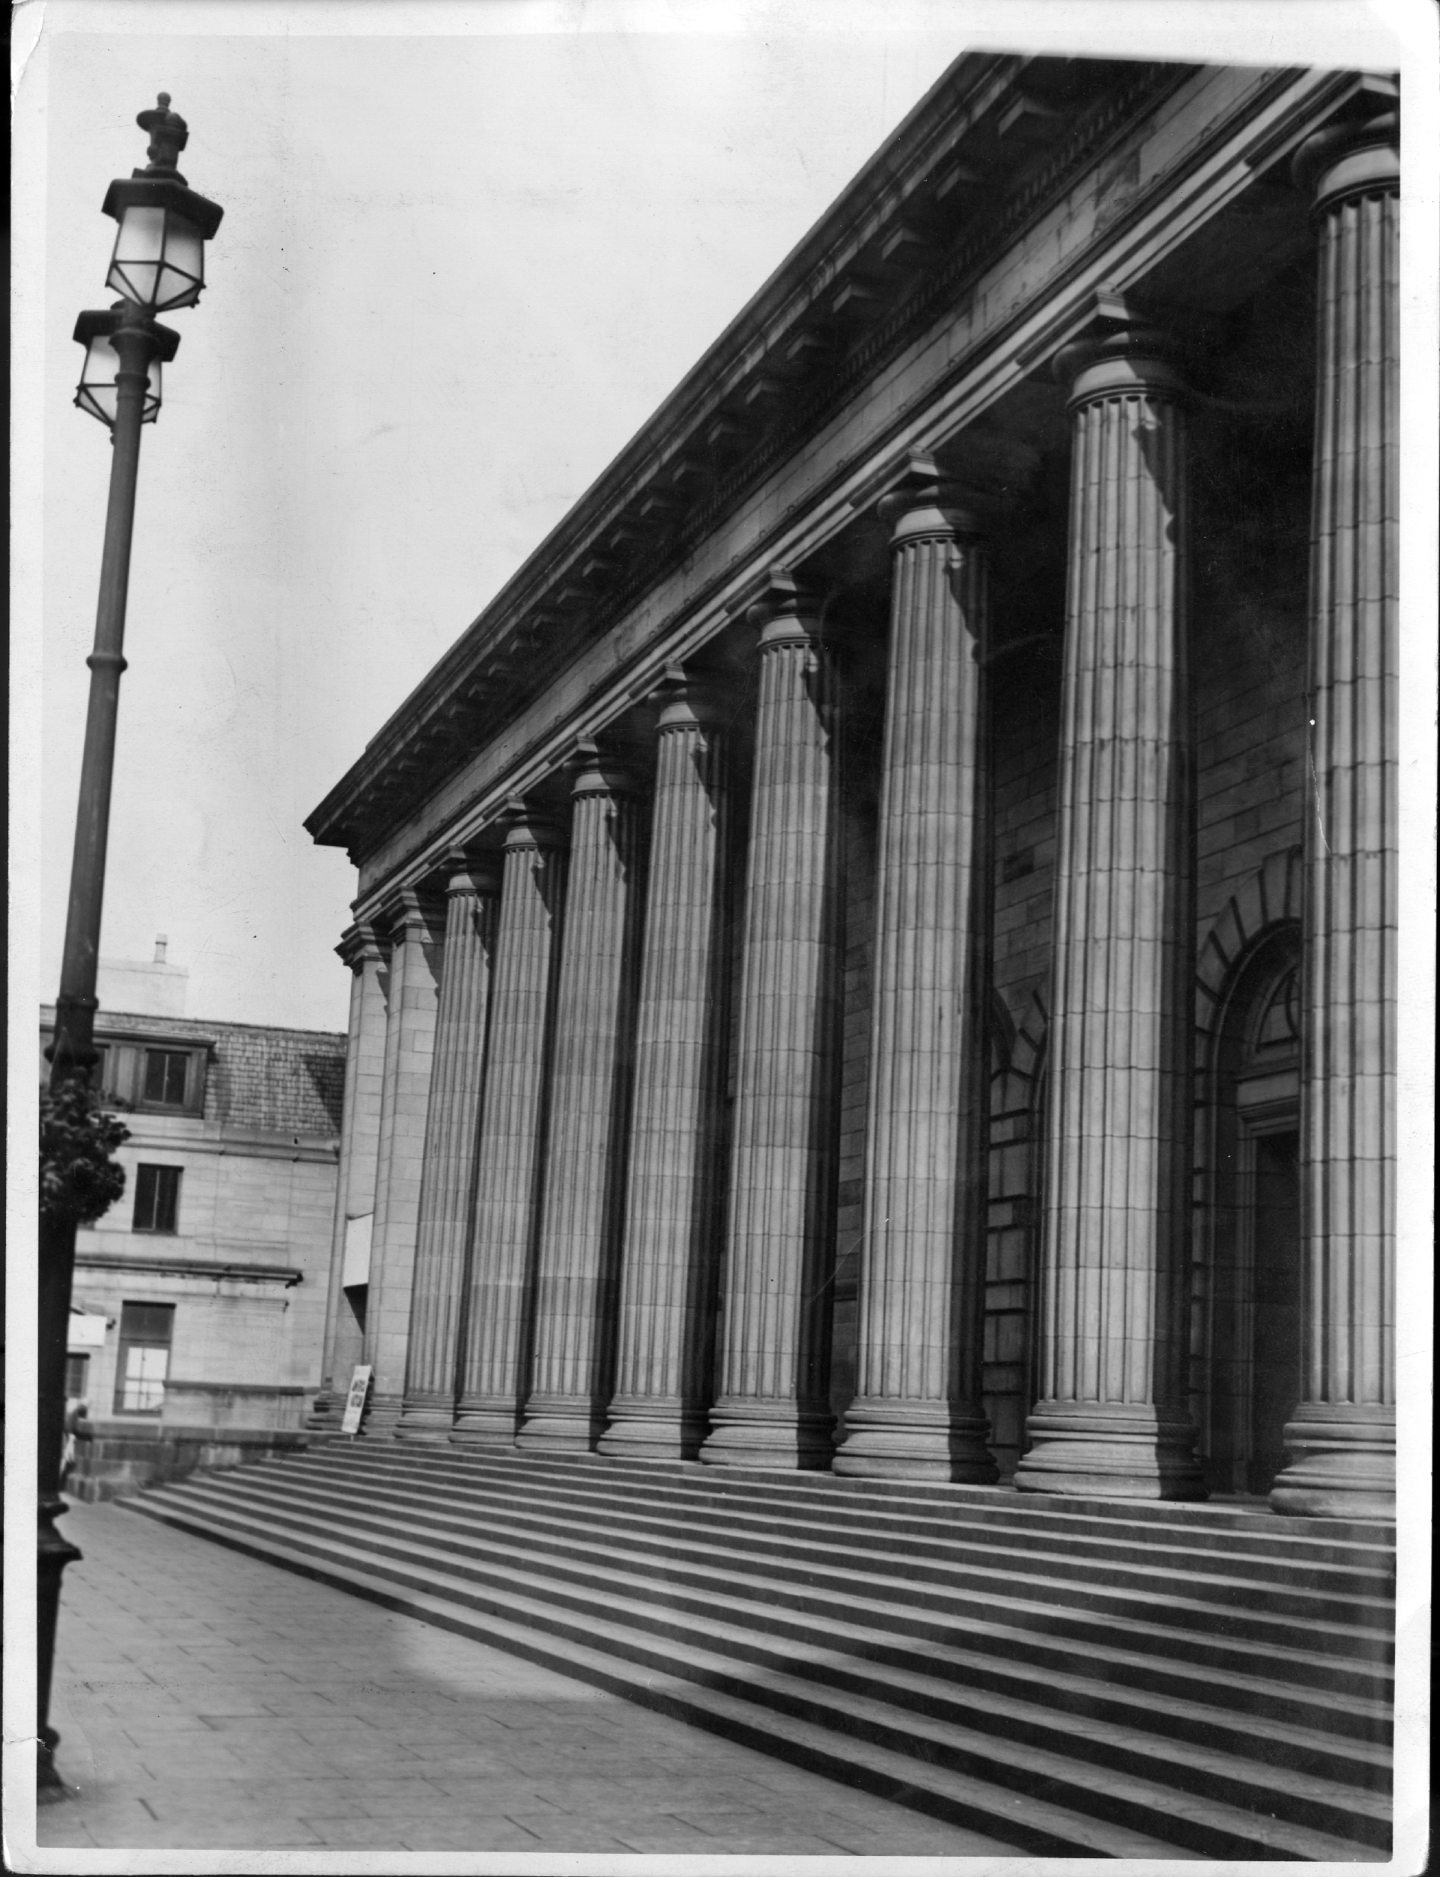 The iconic pillars at the front of the Caird Hall. 1950. Image: Supplied.